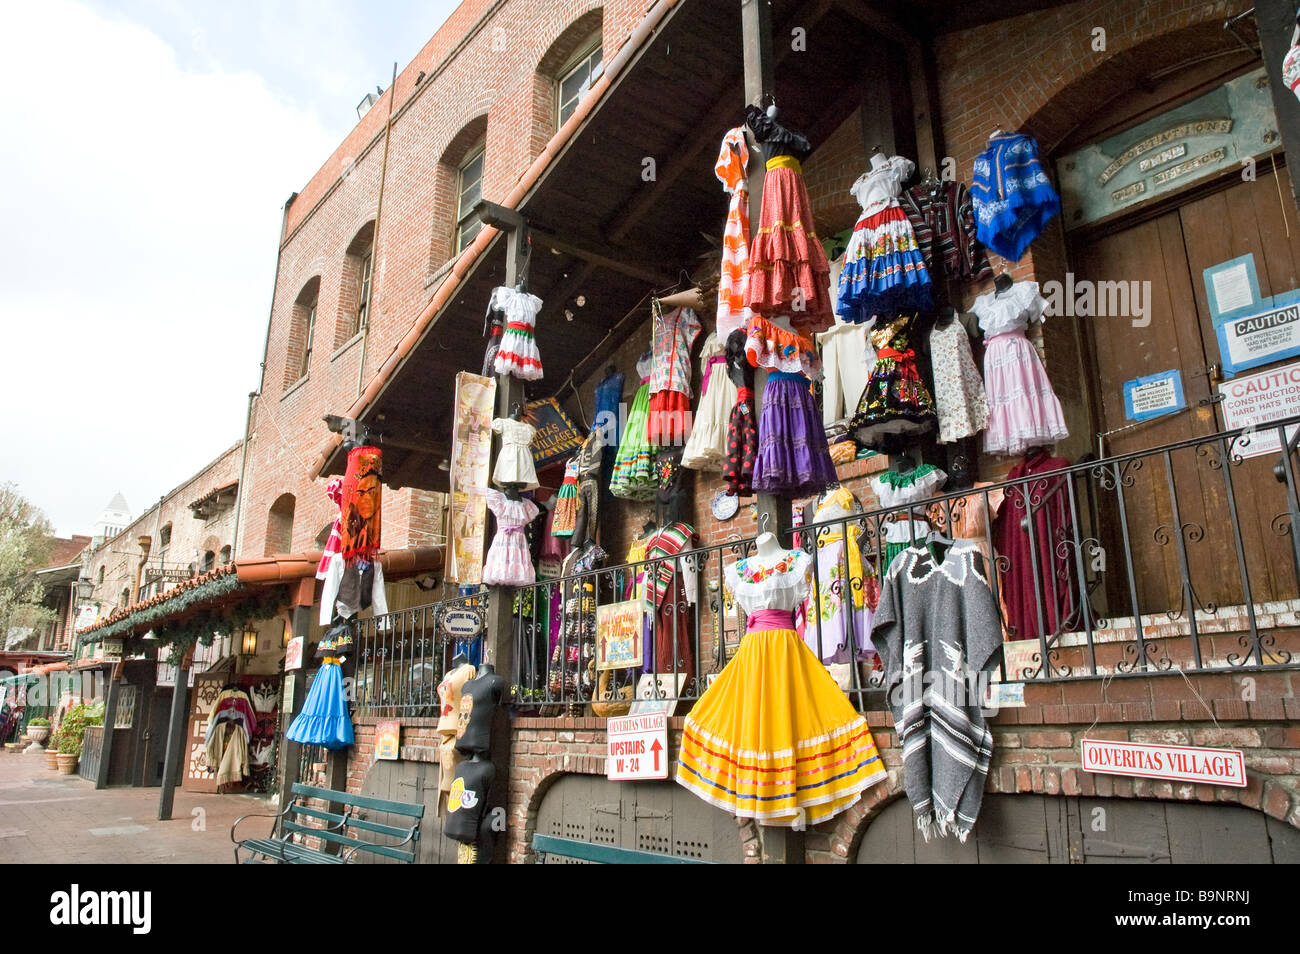 One of the merchants of Olvera Street displaying their wares; Latin themed clothing and accessories Stock Photo